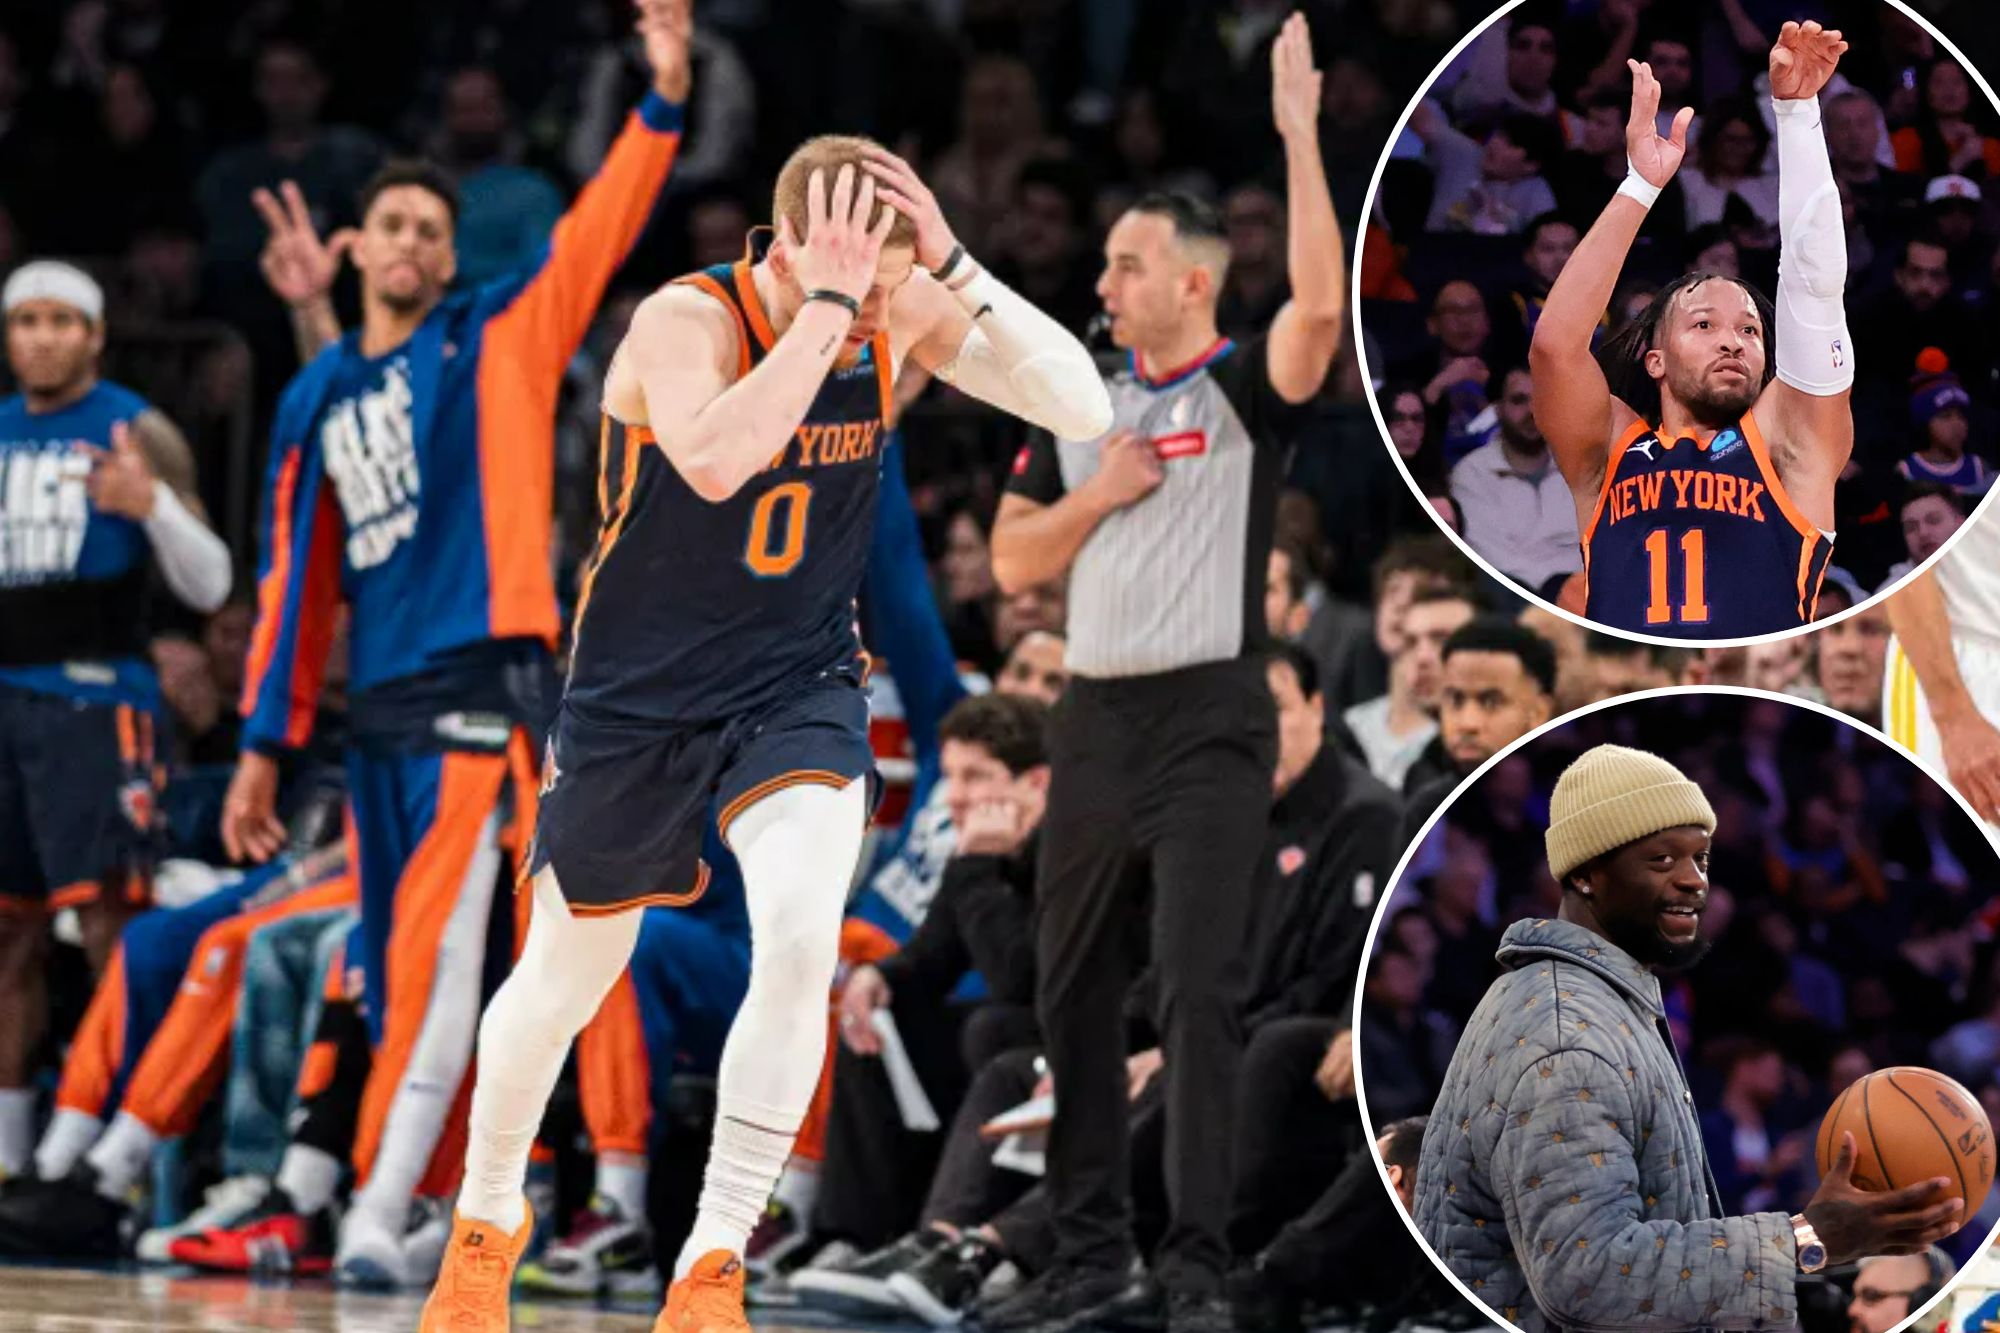 Depleted Knicks must overcome struggles to avoid play-in scenarios